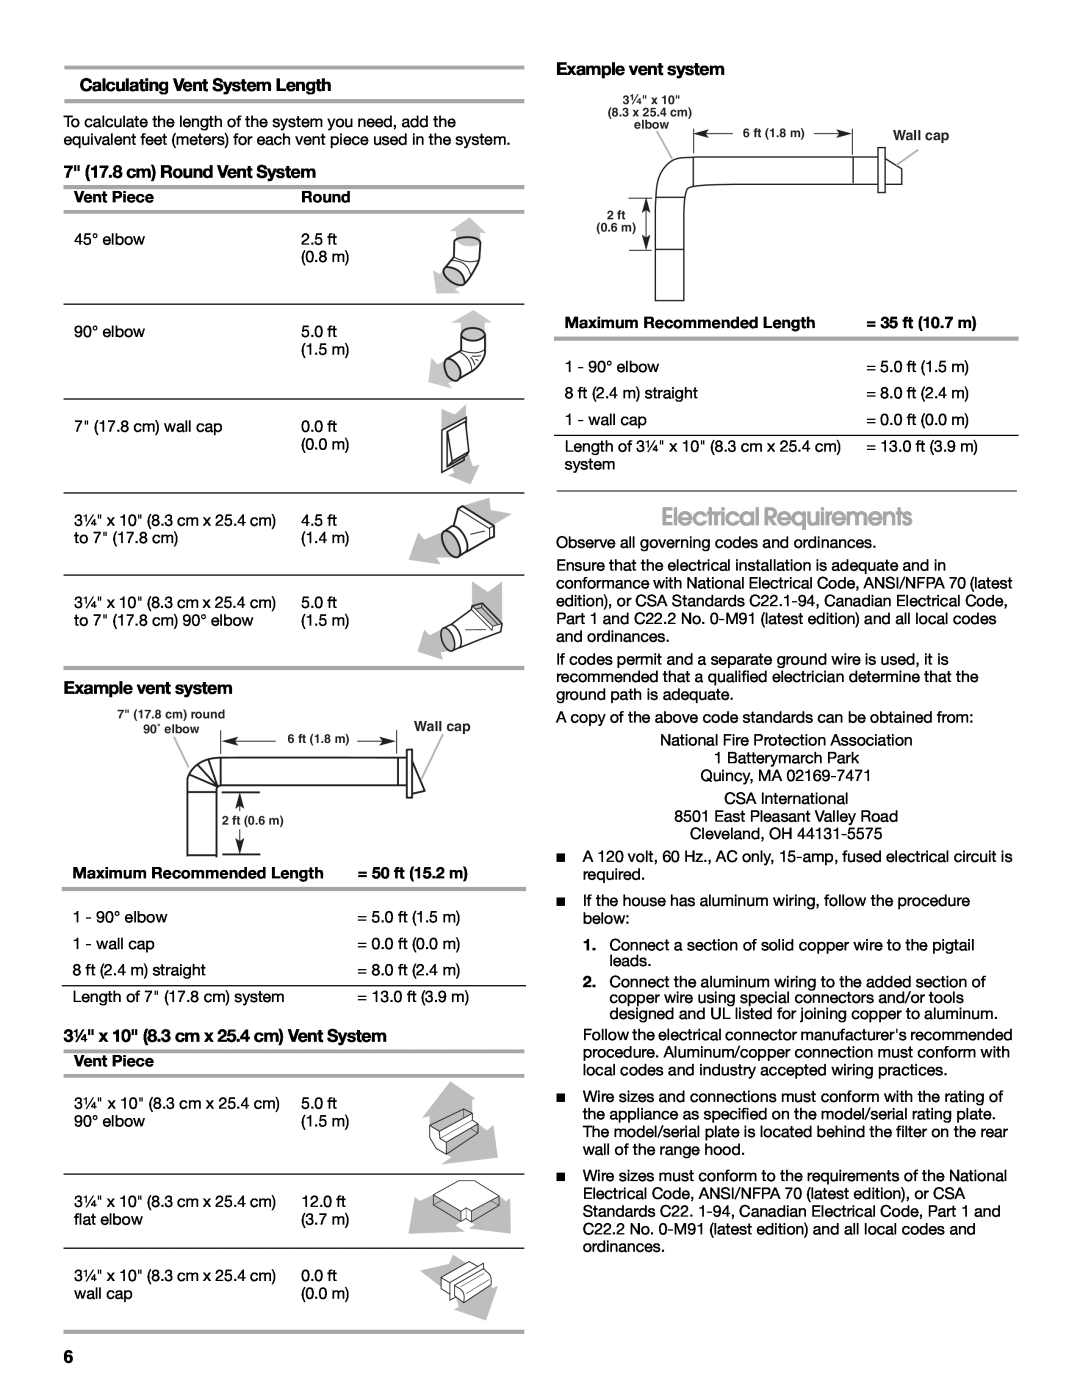 Maytag UXT5236AY Electrical Requirements, Calculating Vent System Length, 7 17.8 cm Round Vent System, Example vent system 